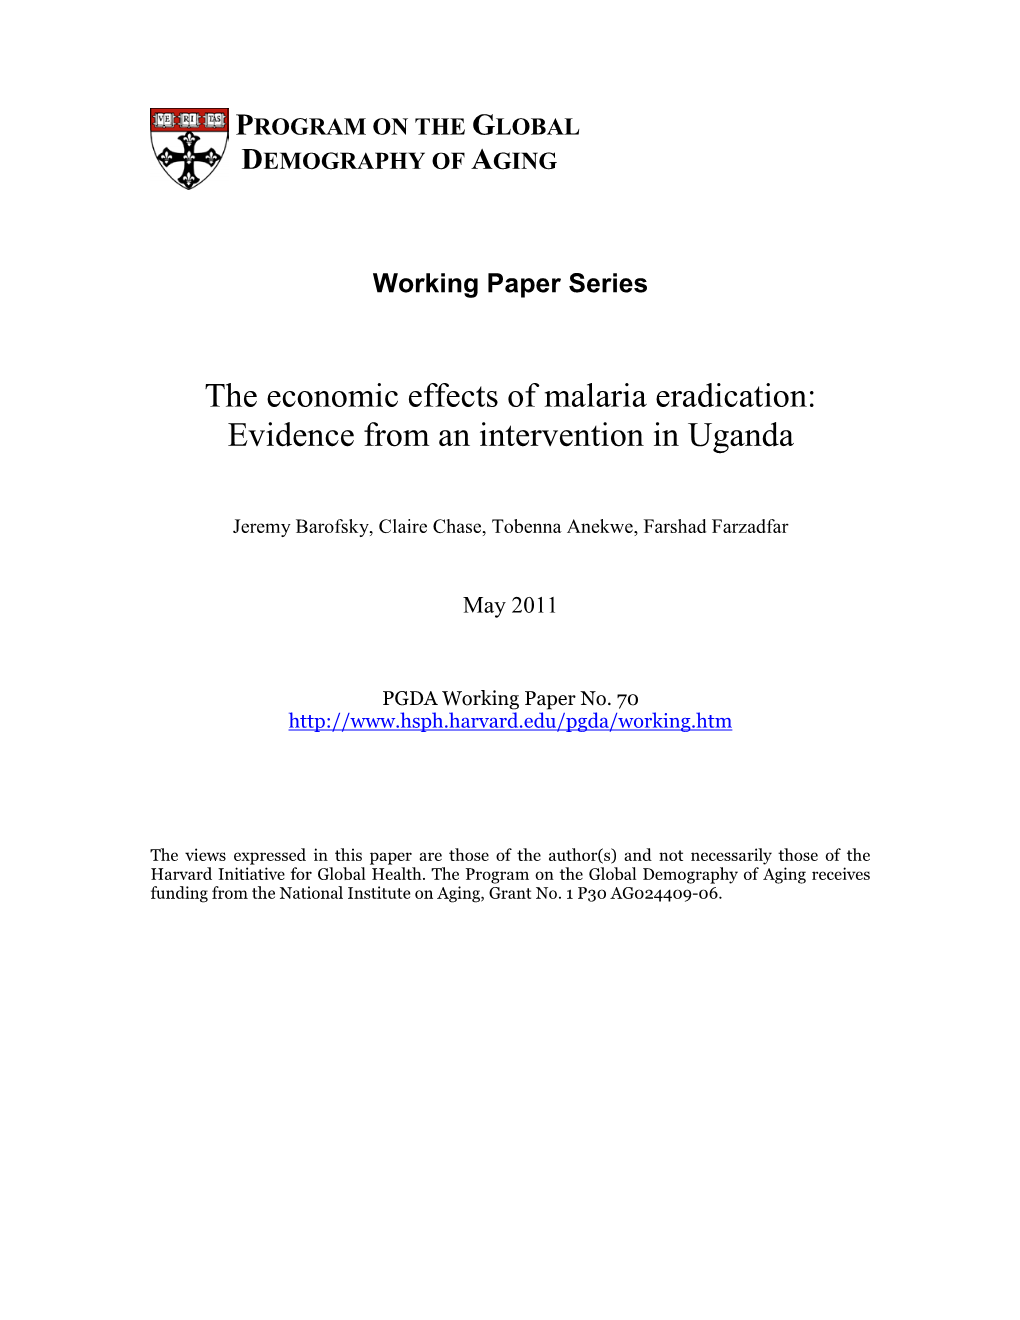 The Economic Effects of Malaria Eradication: Evidence from an Intervention in Uganda